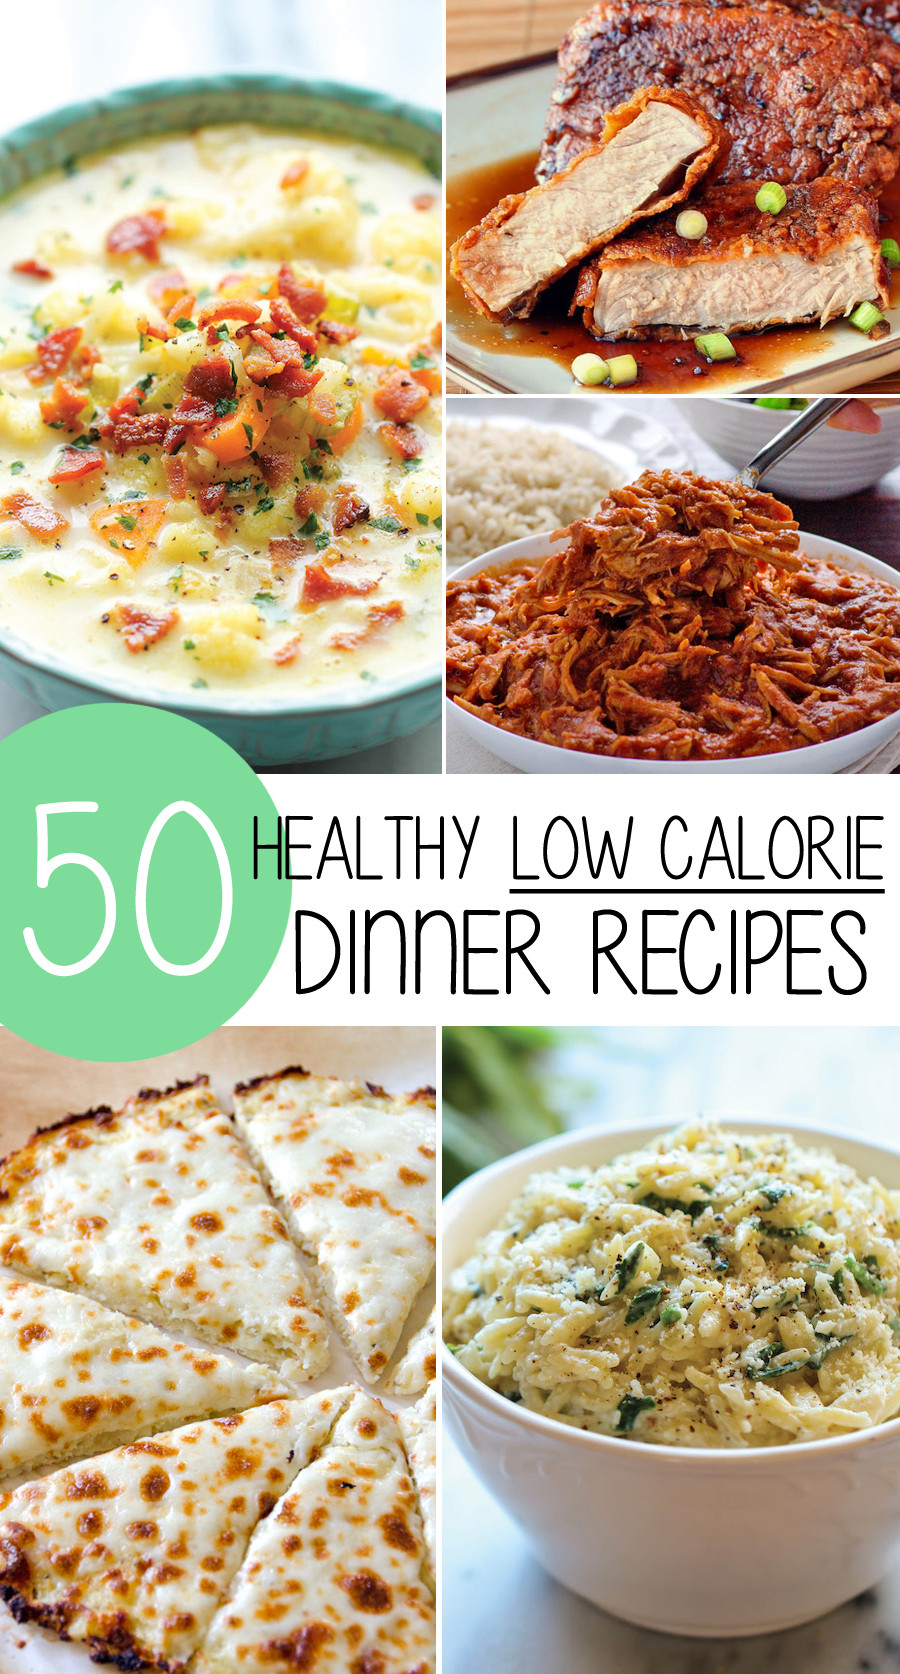 Quick Weight Loss Dinner
 50 Healthy Low Calorie Weight Loss Dinner Recipes